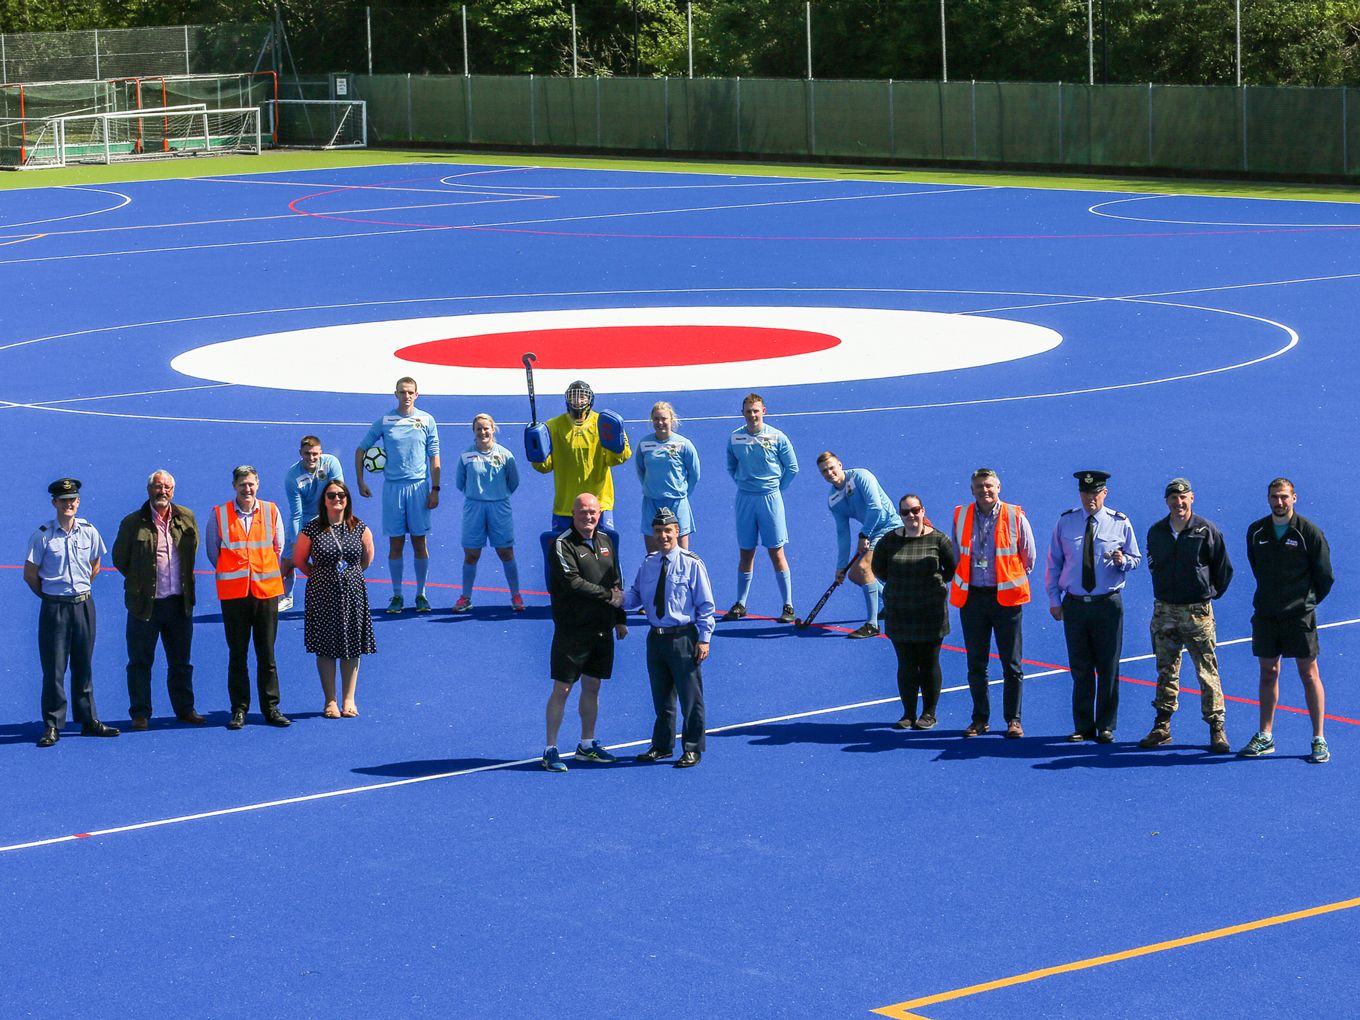 New AstroTurf pitch with station personnel standing near the centre which is the RAF roundel